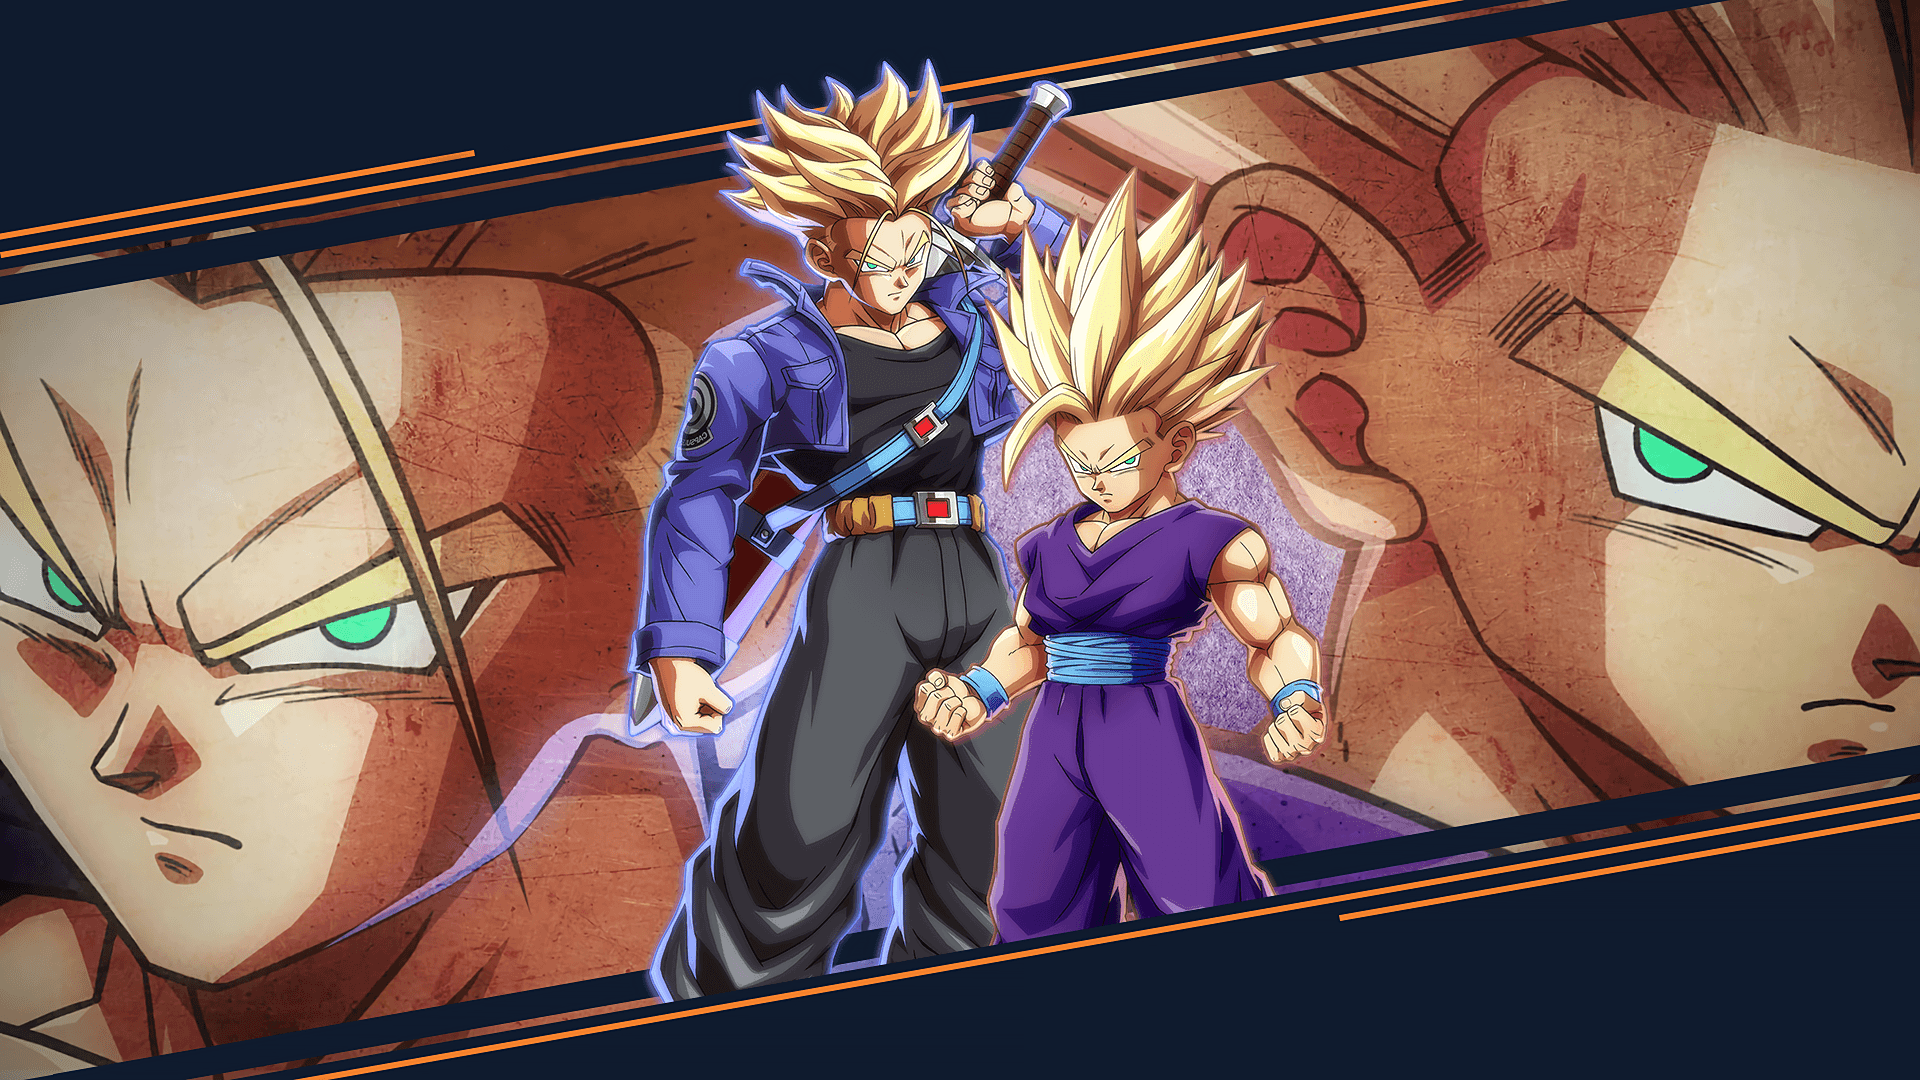 Trunks, Hd Wallpapers & backgrounds Download.